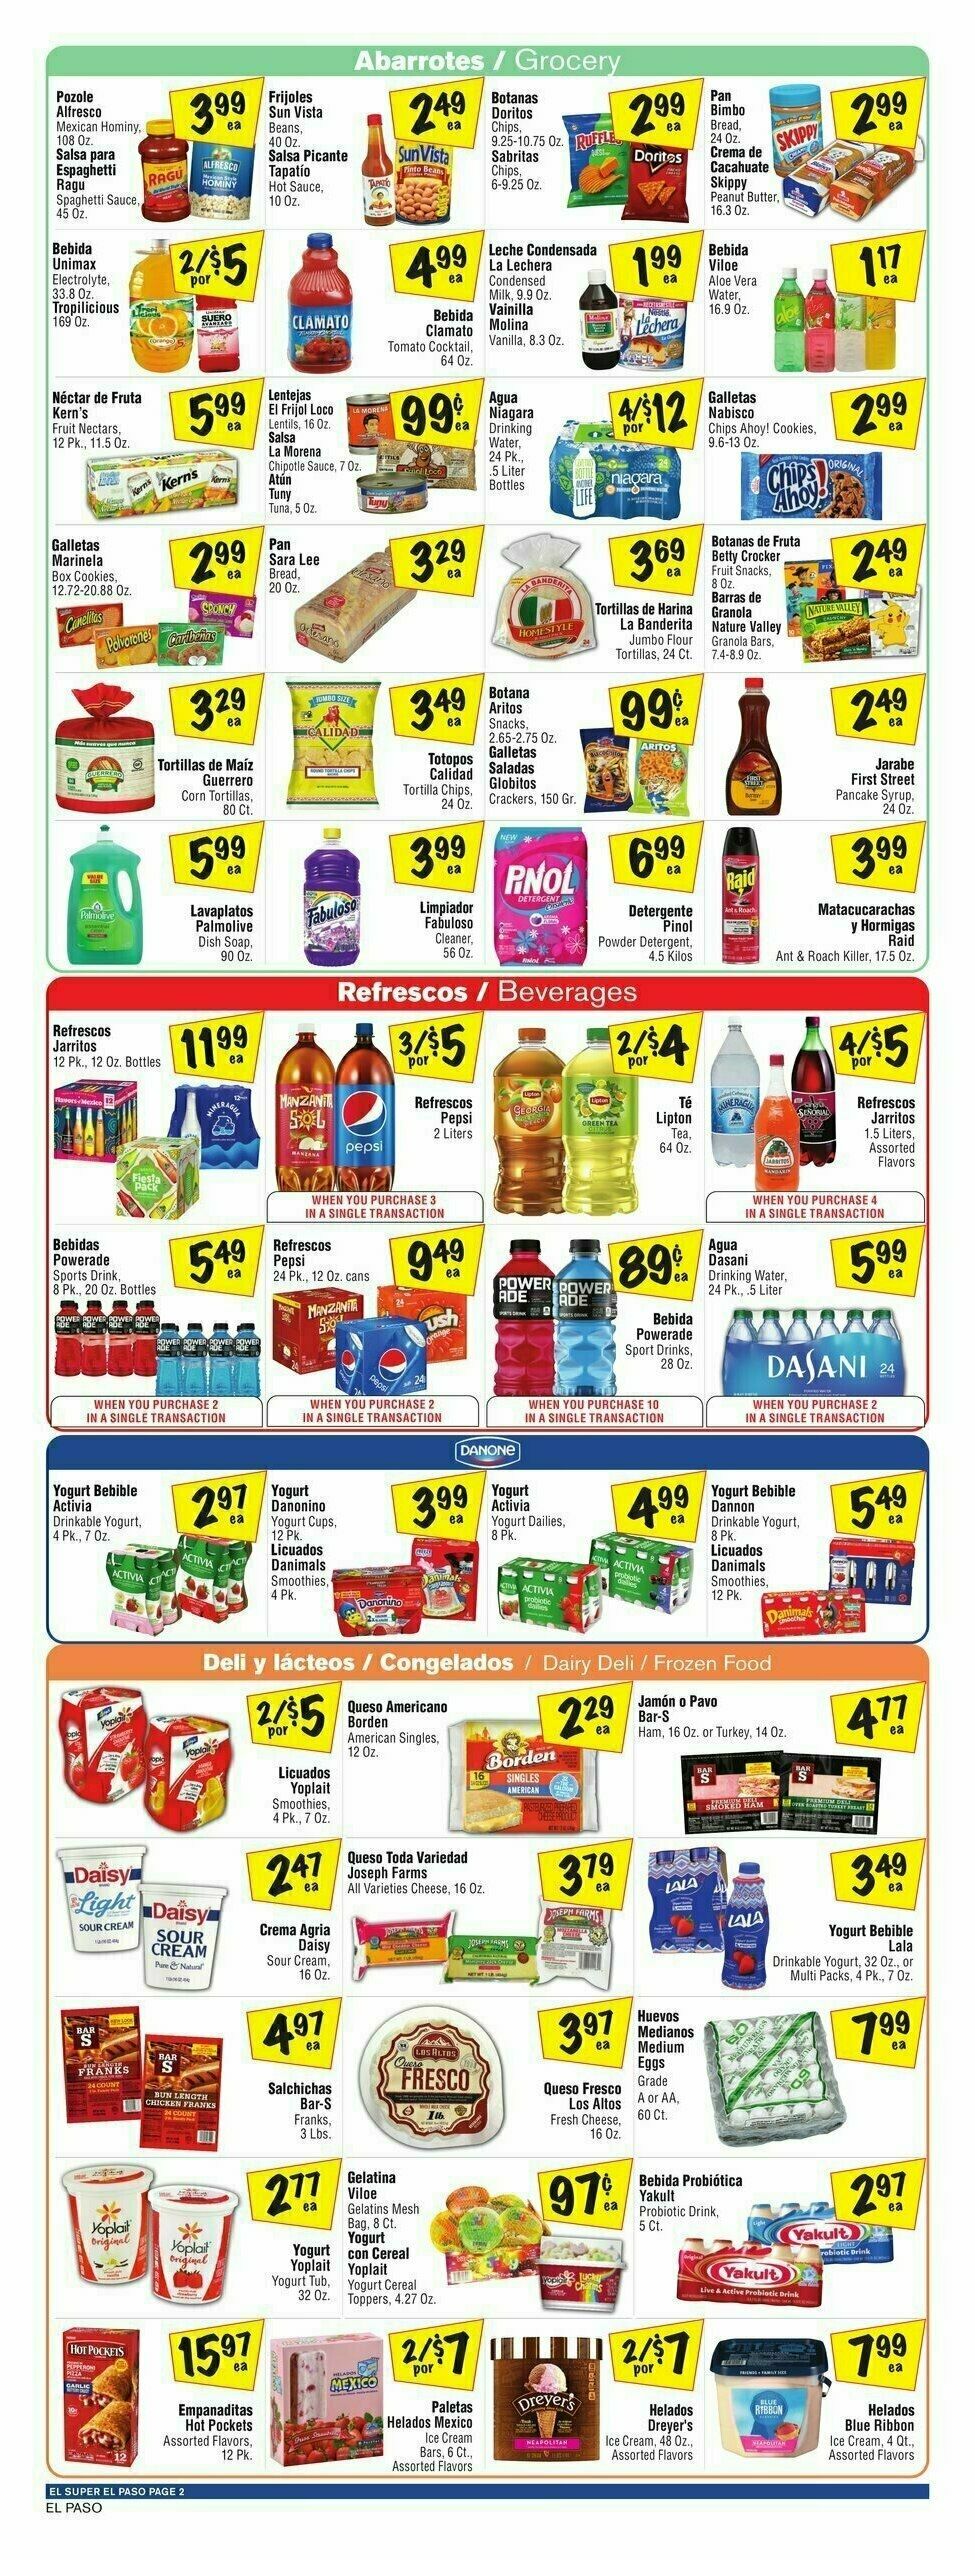 El Super Markets Weekly Ad from September 13